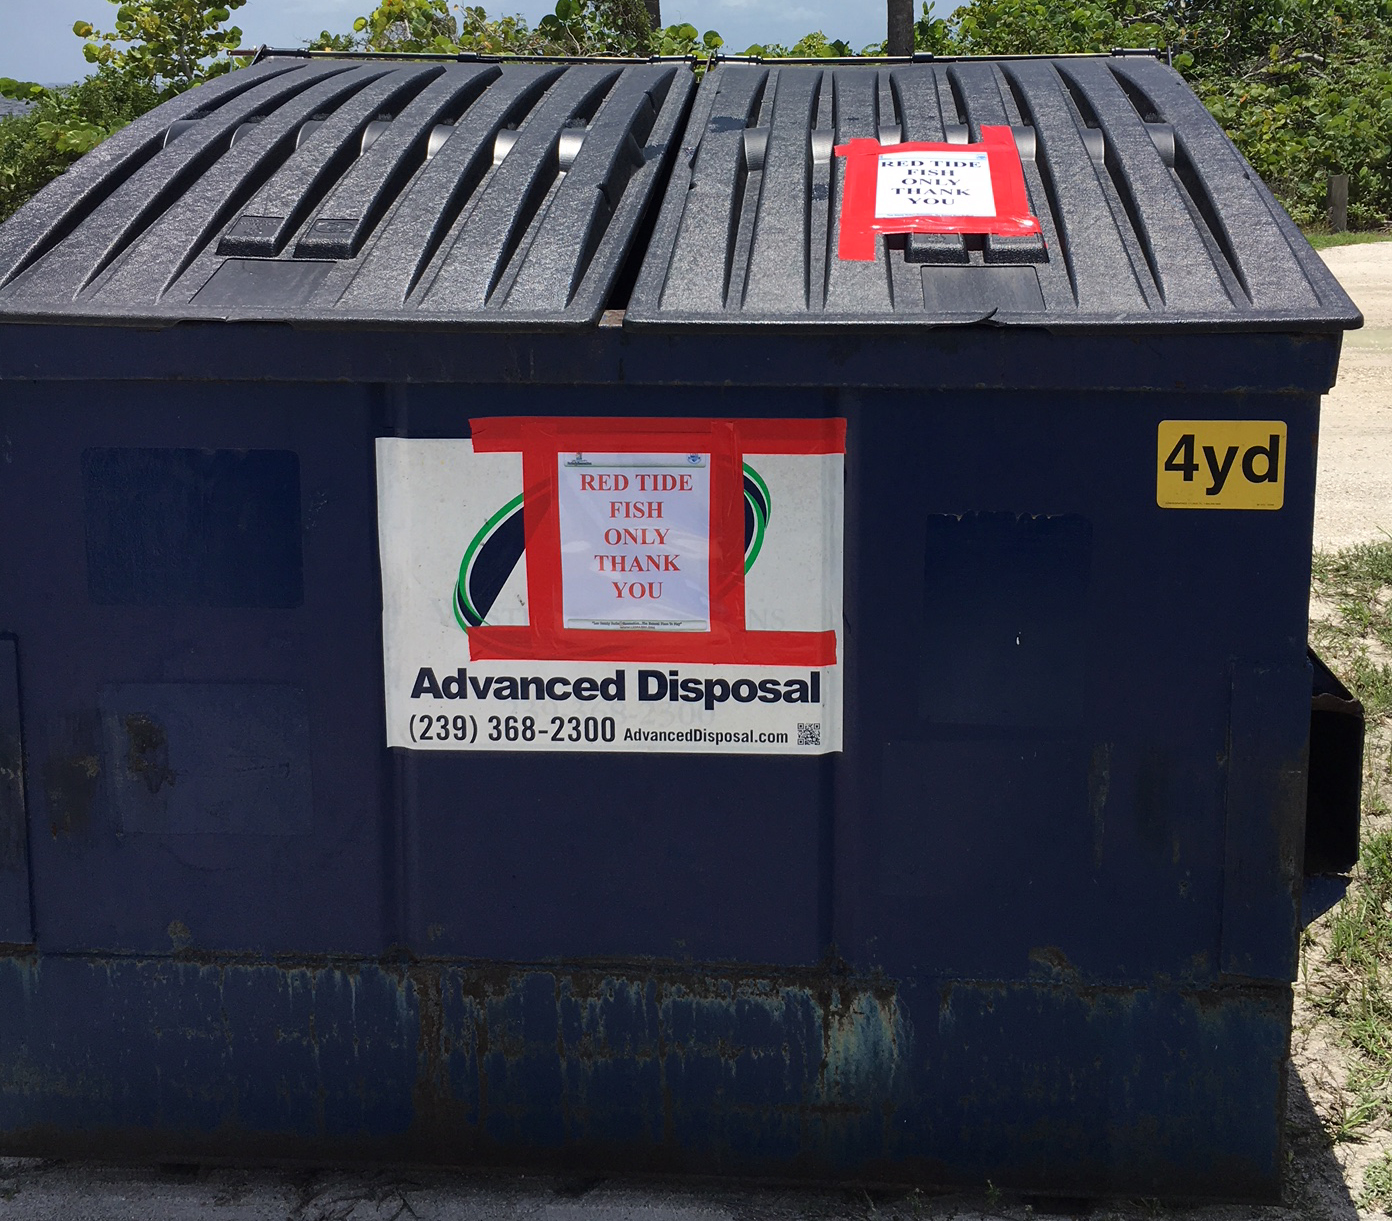 Image of dumpster available for disposal of red tide fish.  Dumpsters have attached signage saying "Red Tode Fish Only" on them.